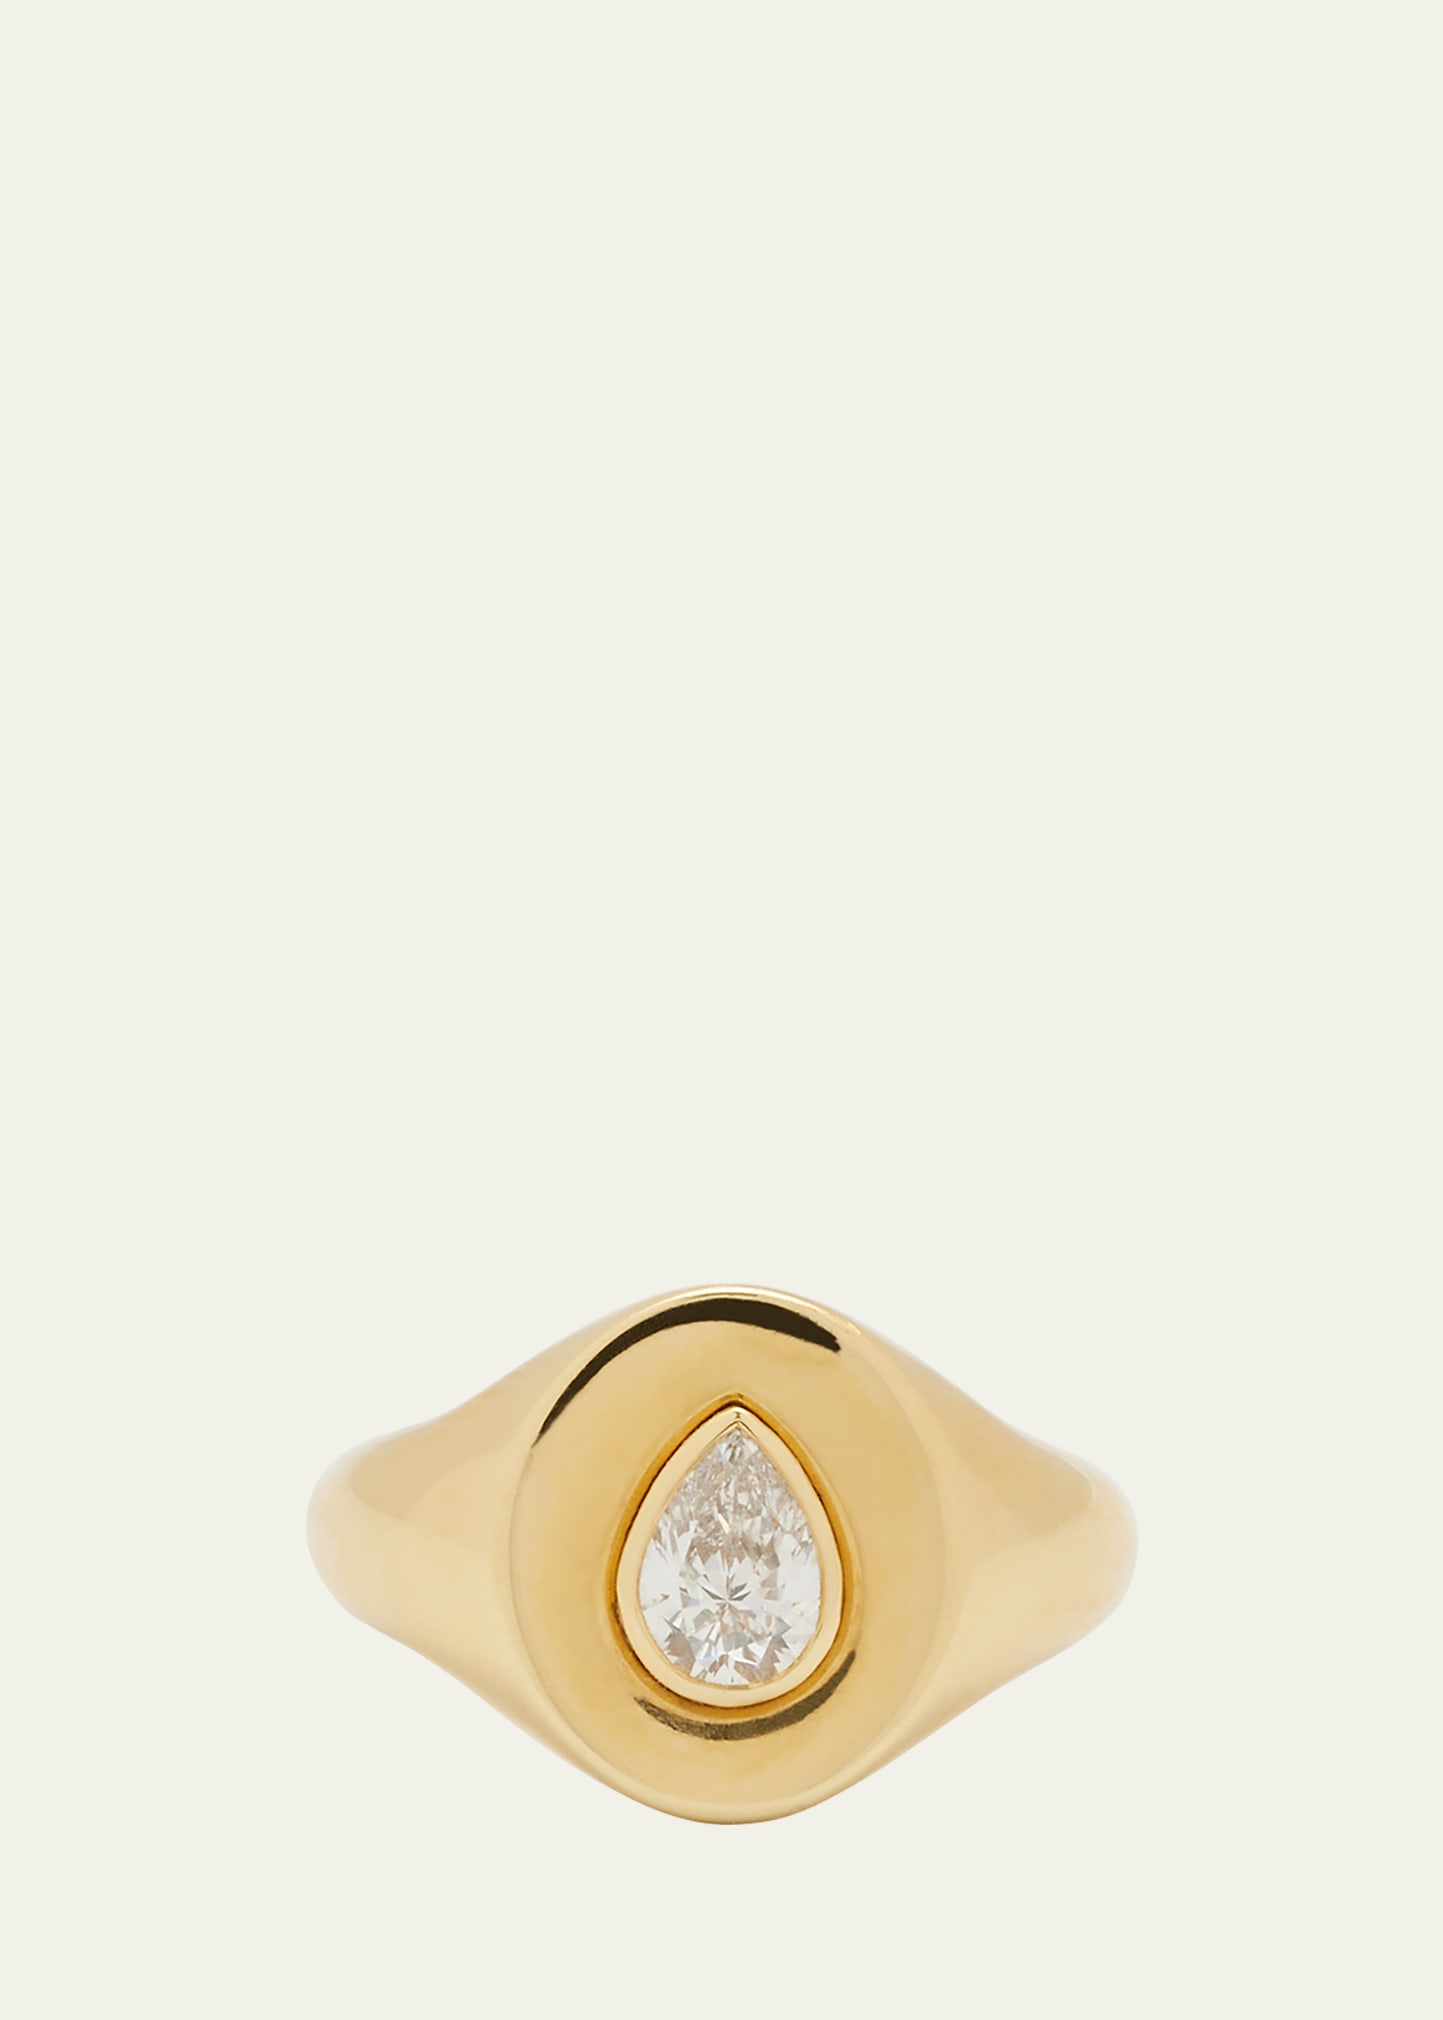 Jemma Wynne Limited Edition Signet Ring with Pear-Shaped Diamond